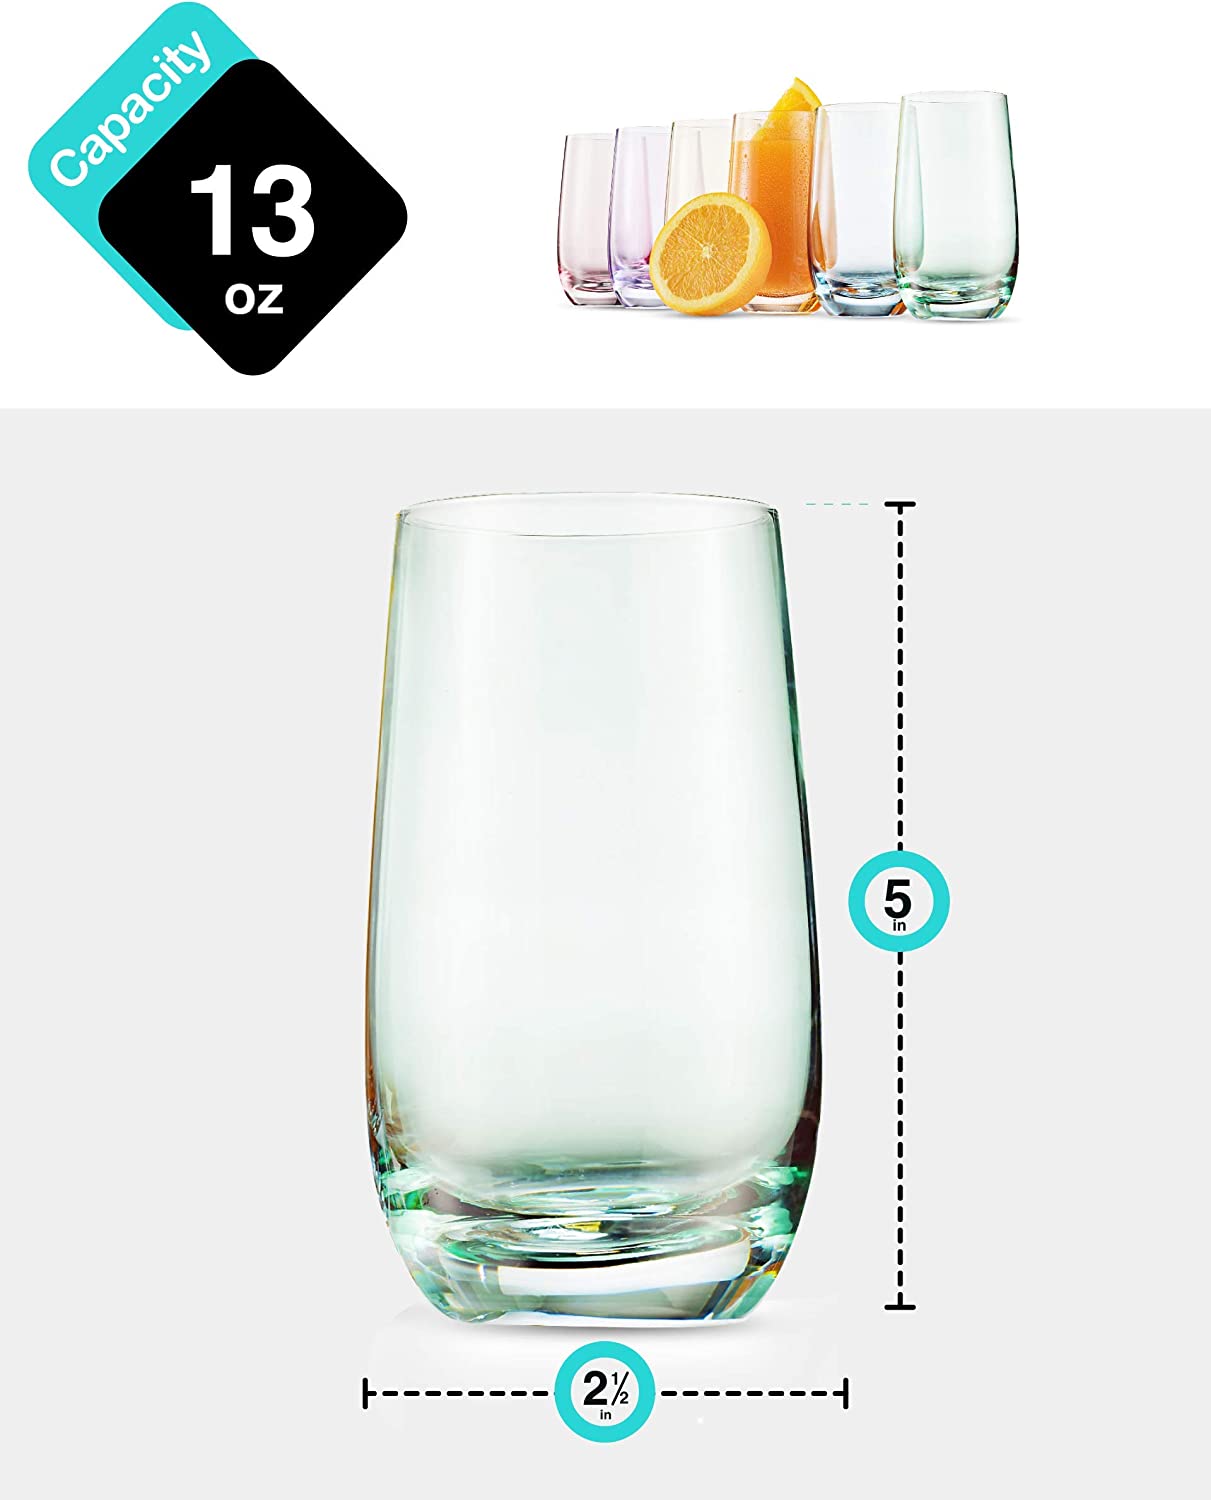 MITBAK 13- OZ Colored Highball Glasses (Set of 6) | Drinking Glasses Tumblers for Mixed Drinks, Water, Juice beer, cocktail | Glassware Set, Excellent Gift | Glass Cups Made in slovakia